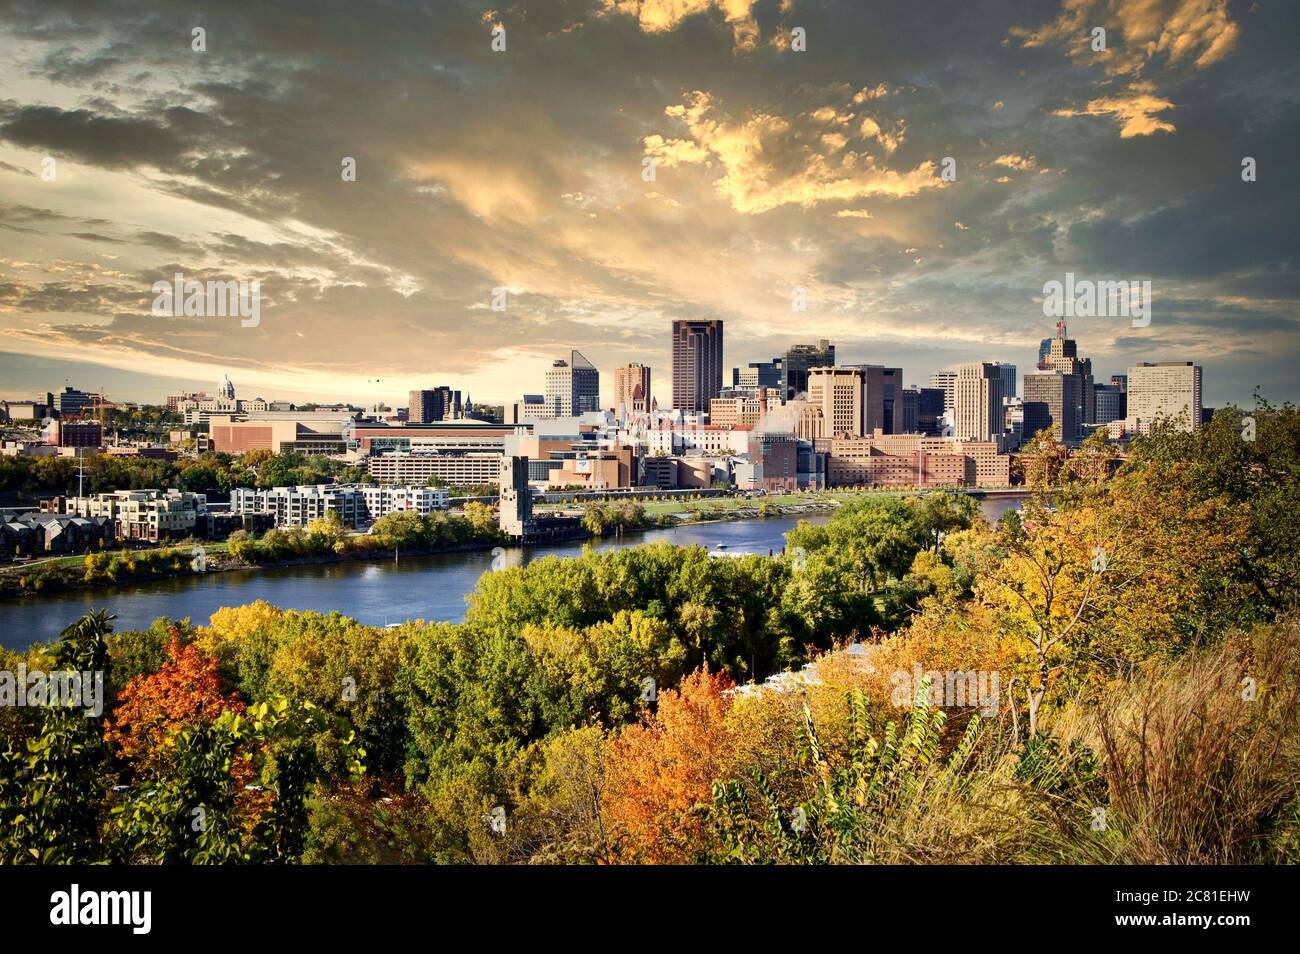 The St. Paul skyline rises along the Mississippi River and is the capitol city of Minnesota. Stock Photo